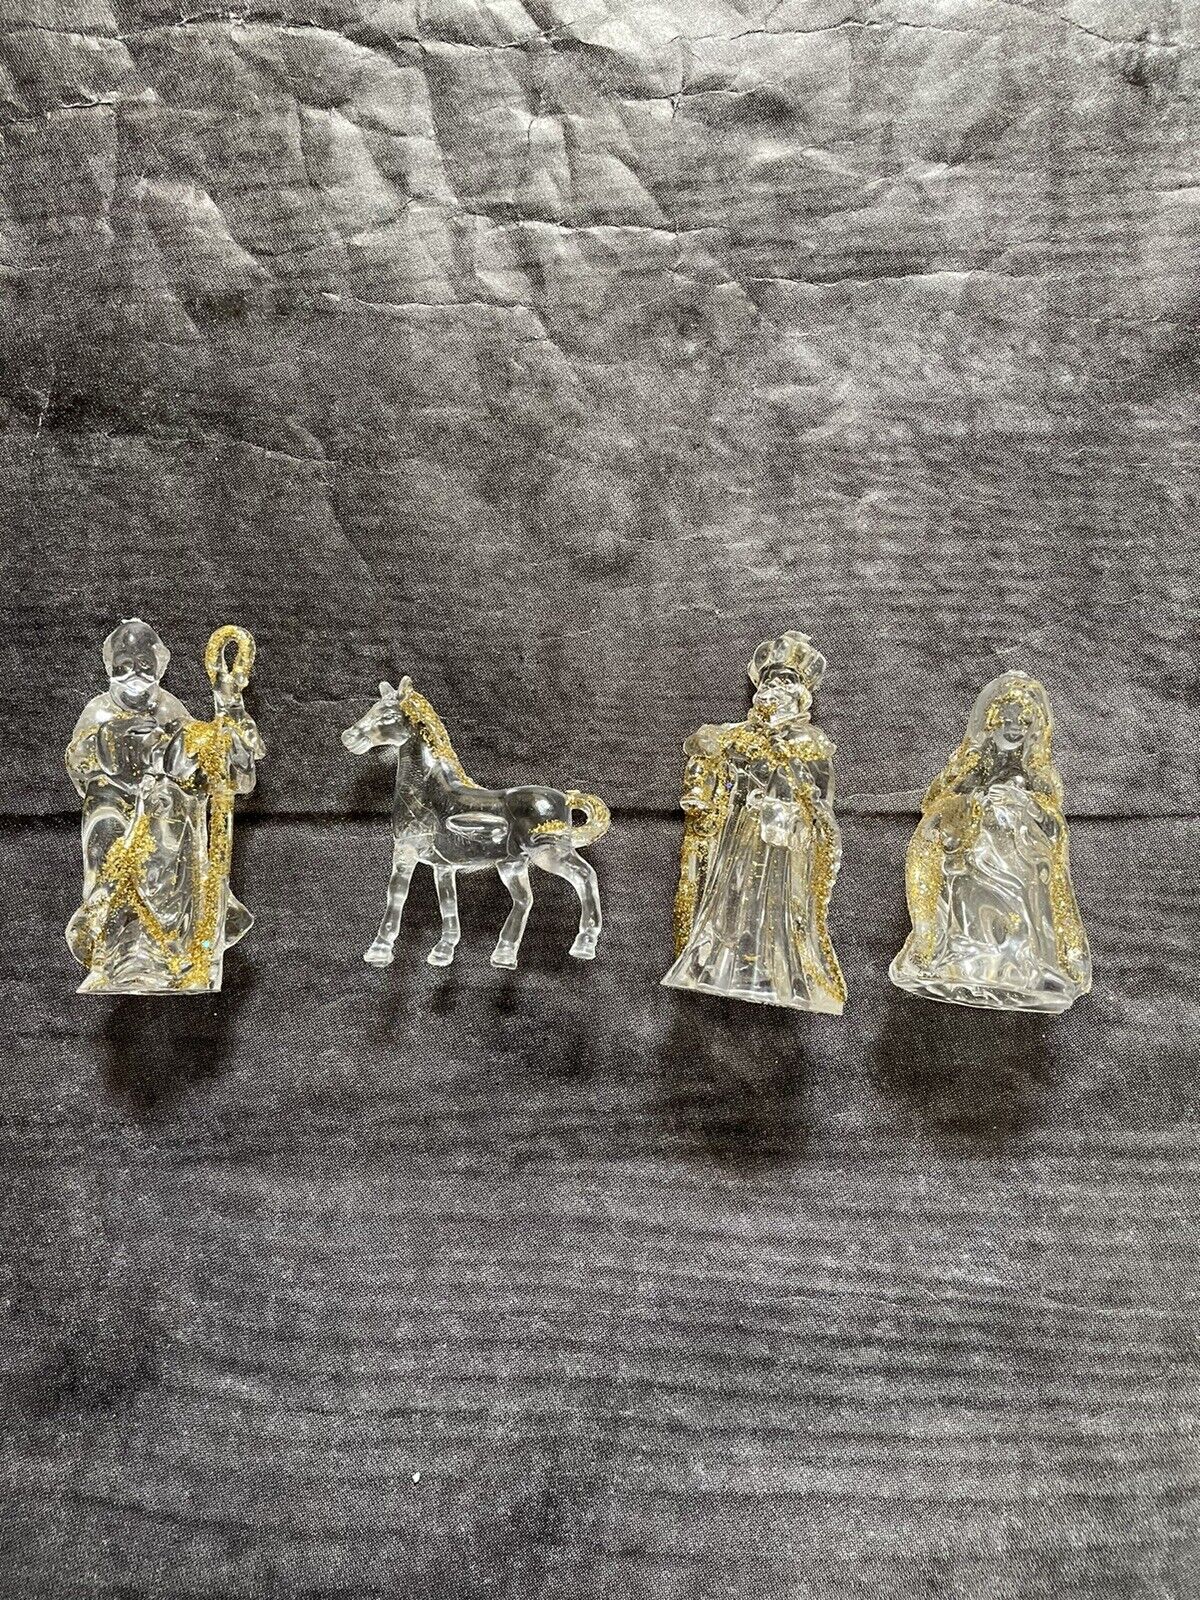 Plastic Glitter Nativity Figures for Crafting